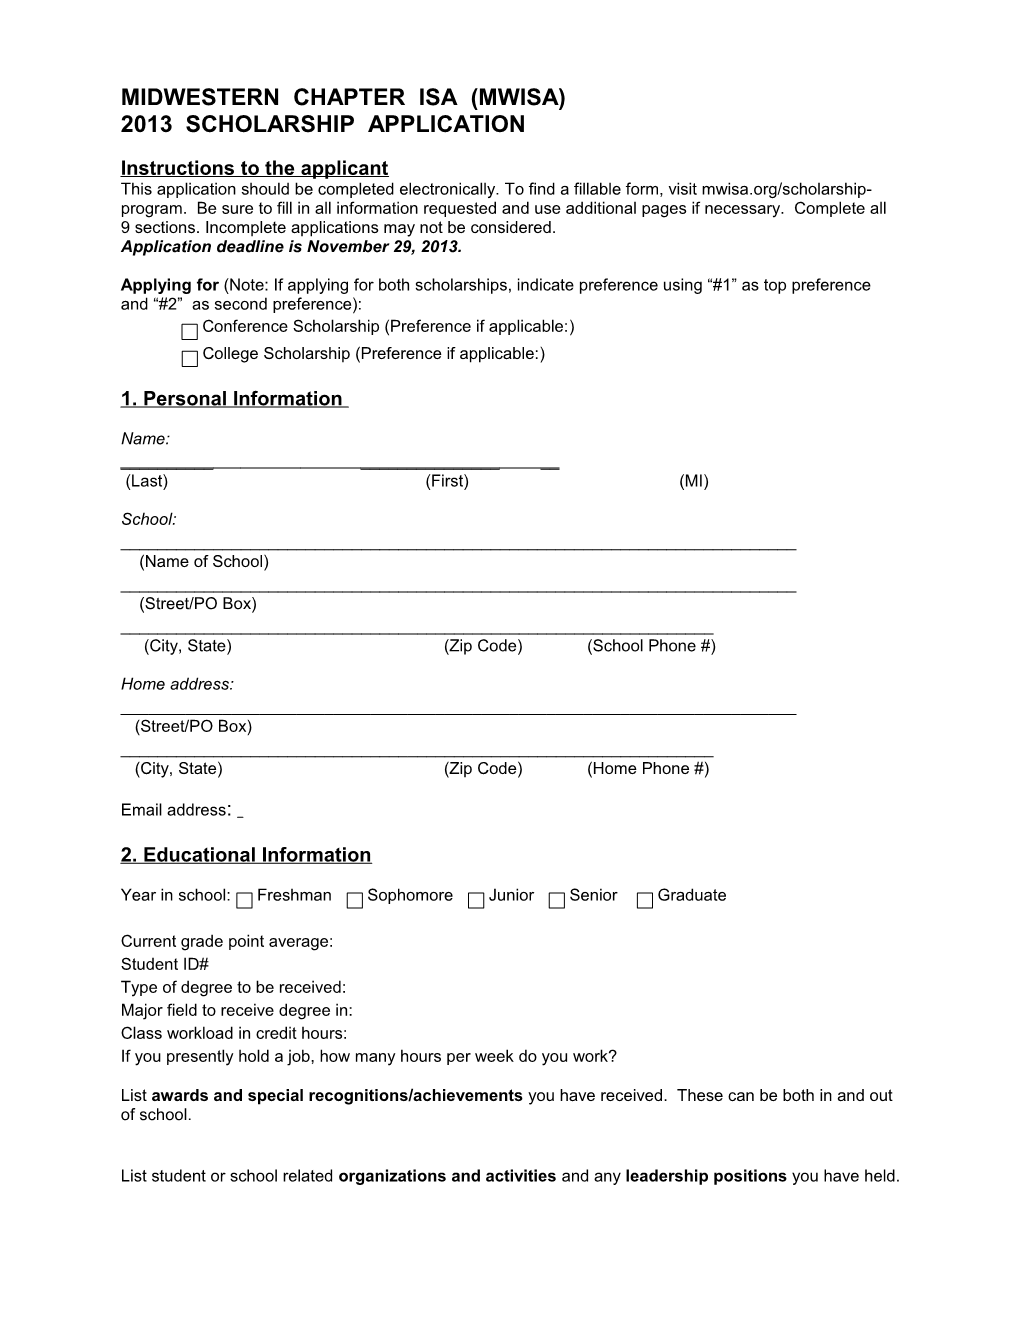 Midwestern Chapter Isa Scholarship Application